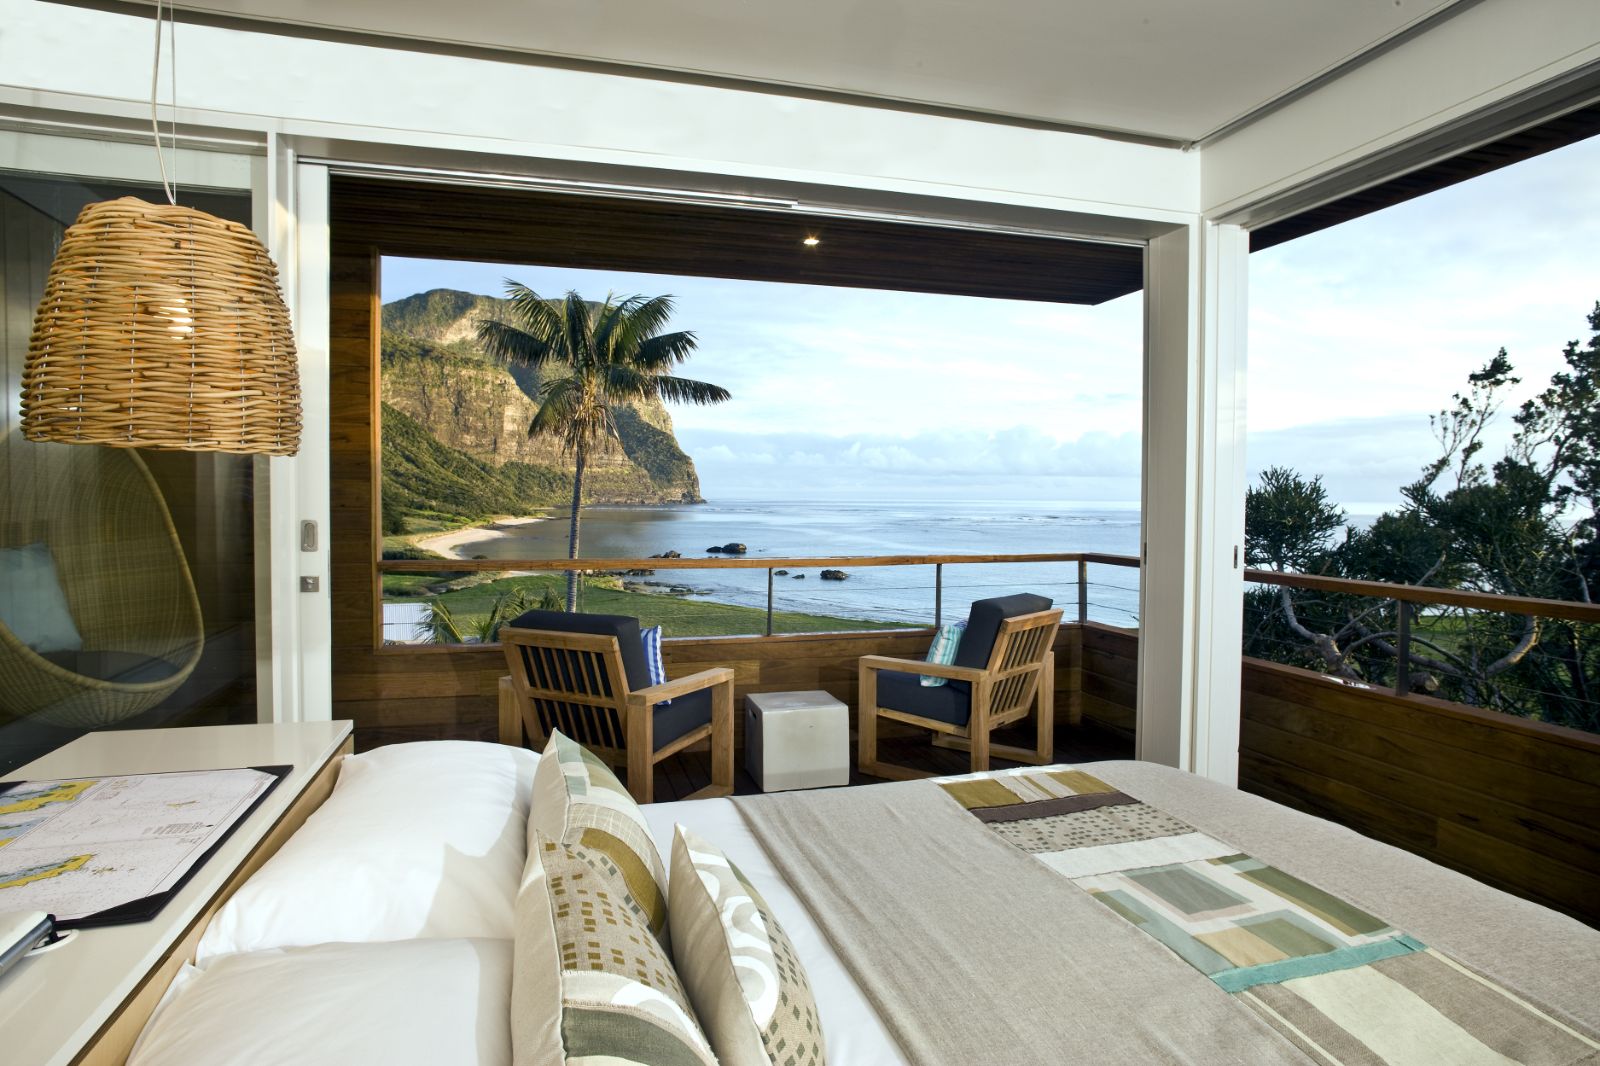 beautiful panoramic sea view of Lord Howe Island from lidgbird pavillion bedroom with balcony in luxury Capella Lodge in Australia